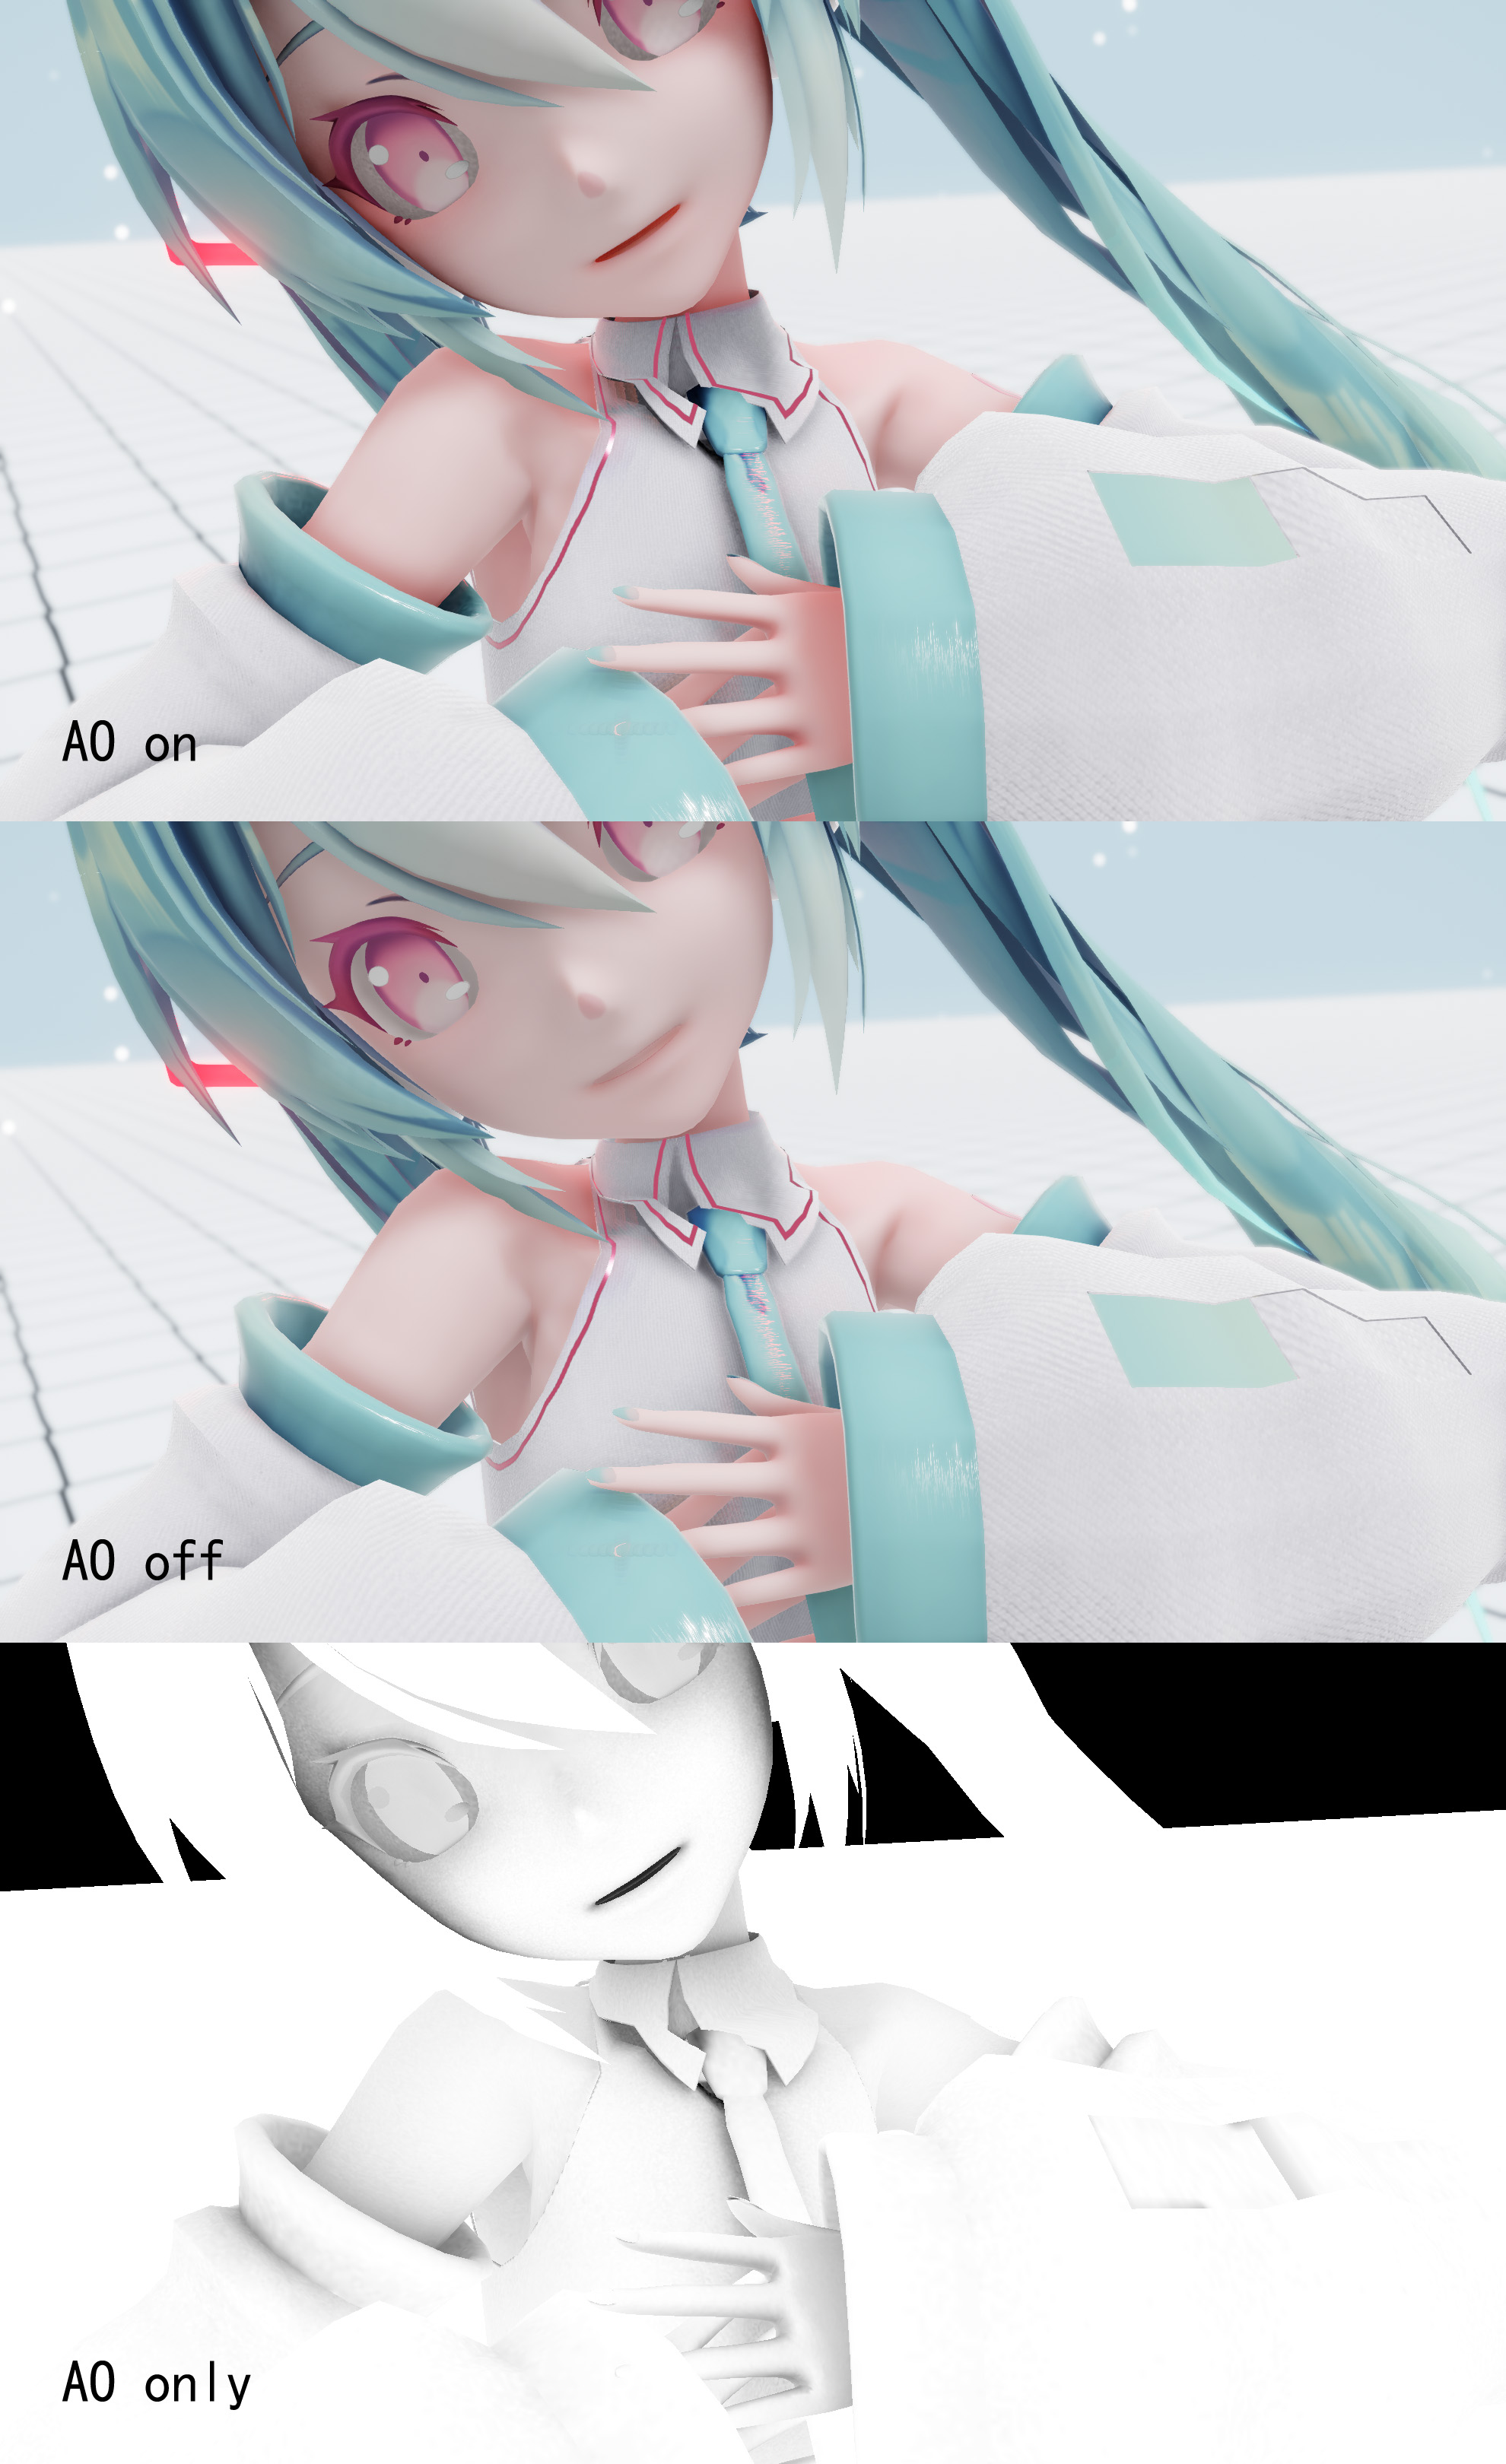 mmd raycast not working